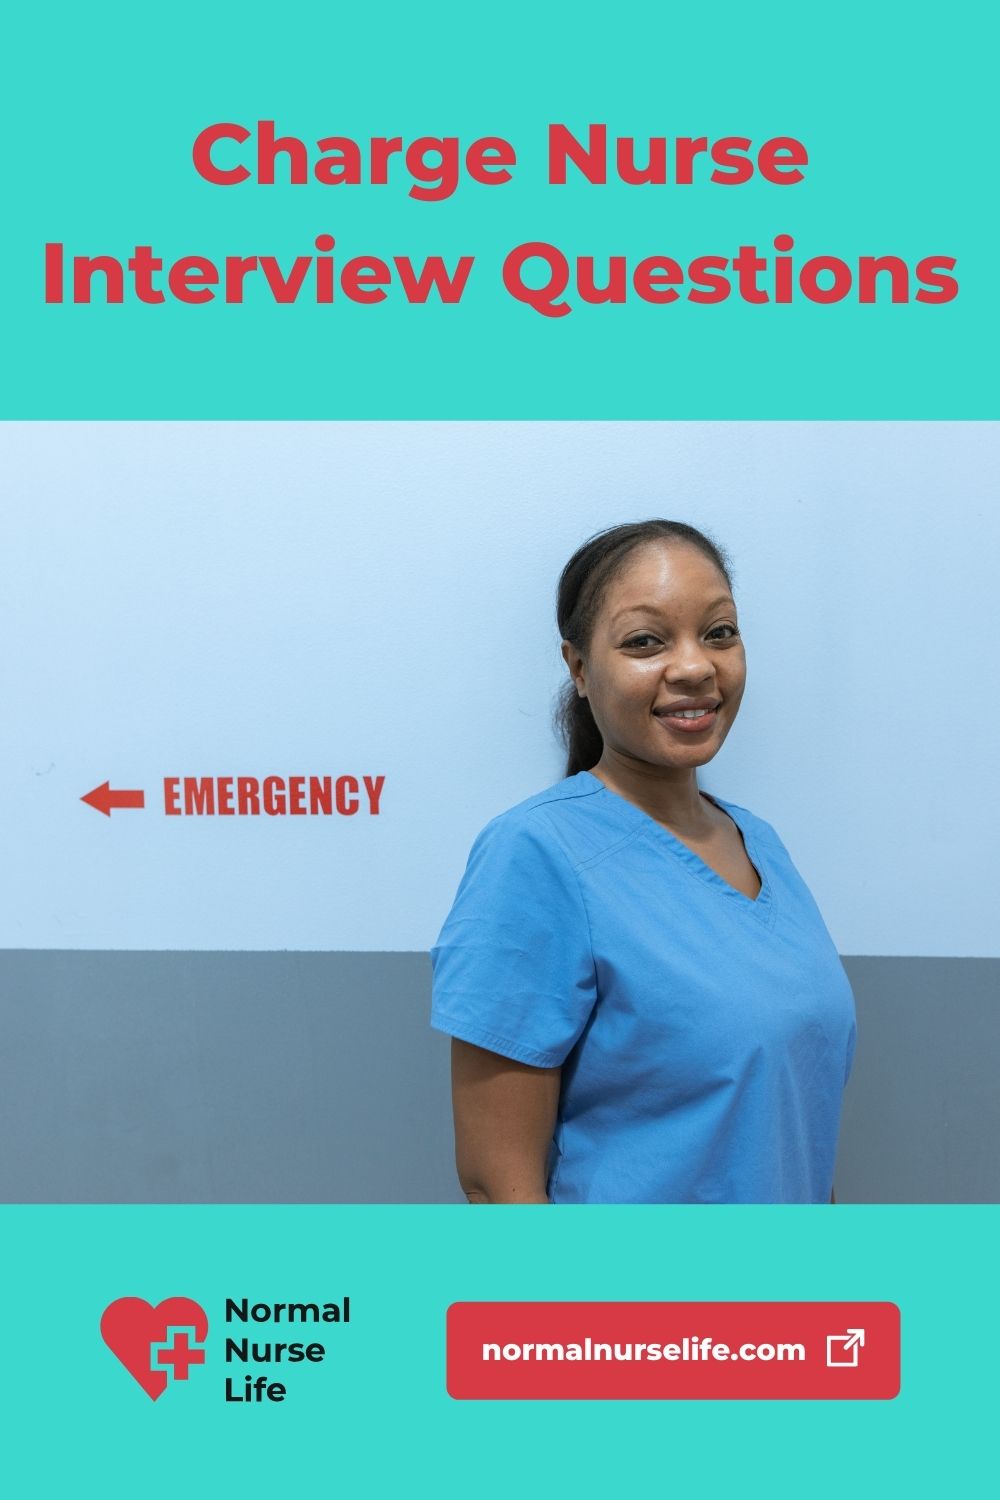 Charge nurse interview questions and answers